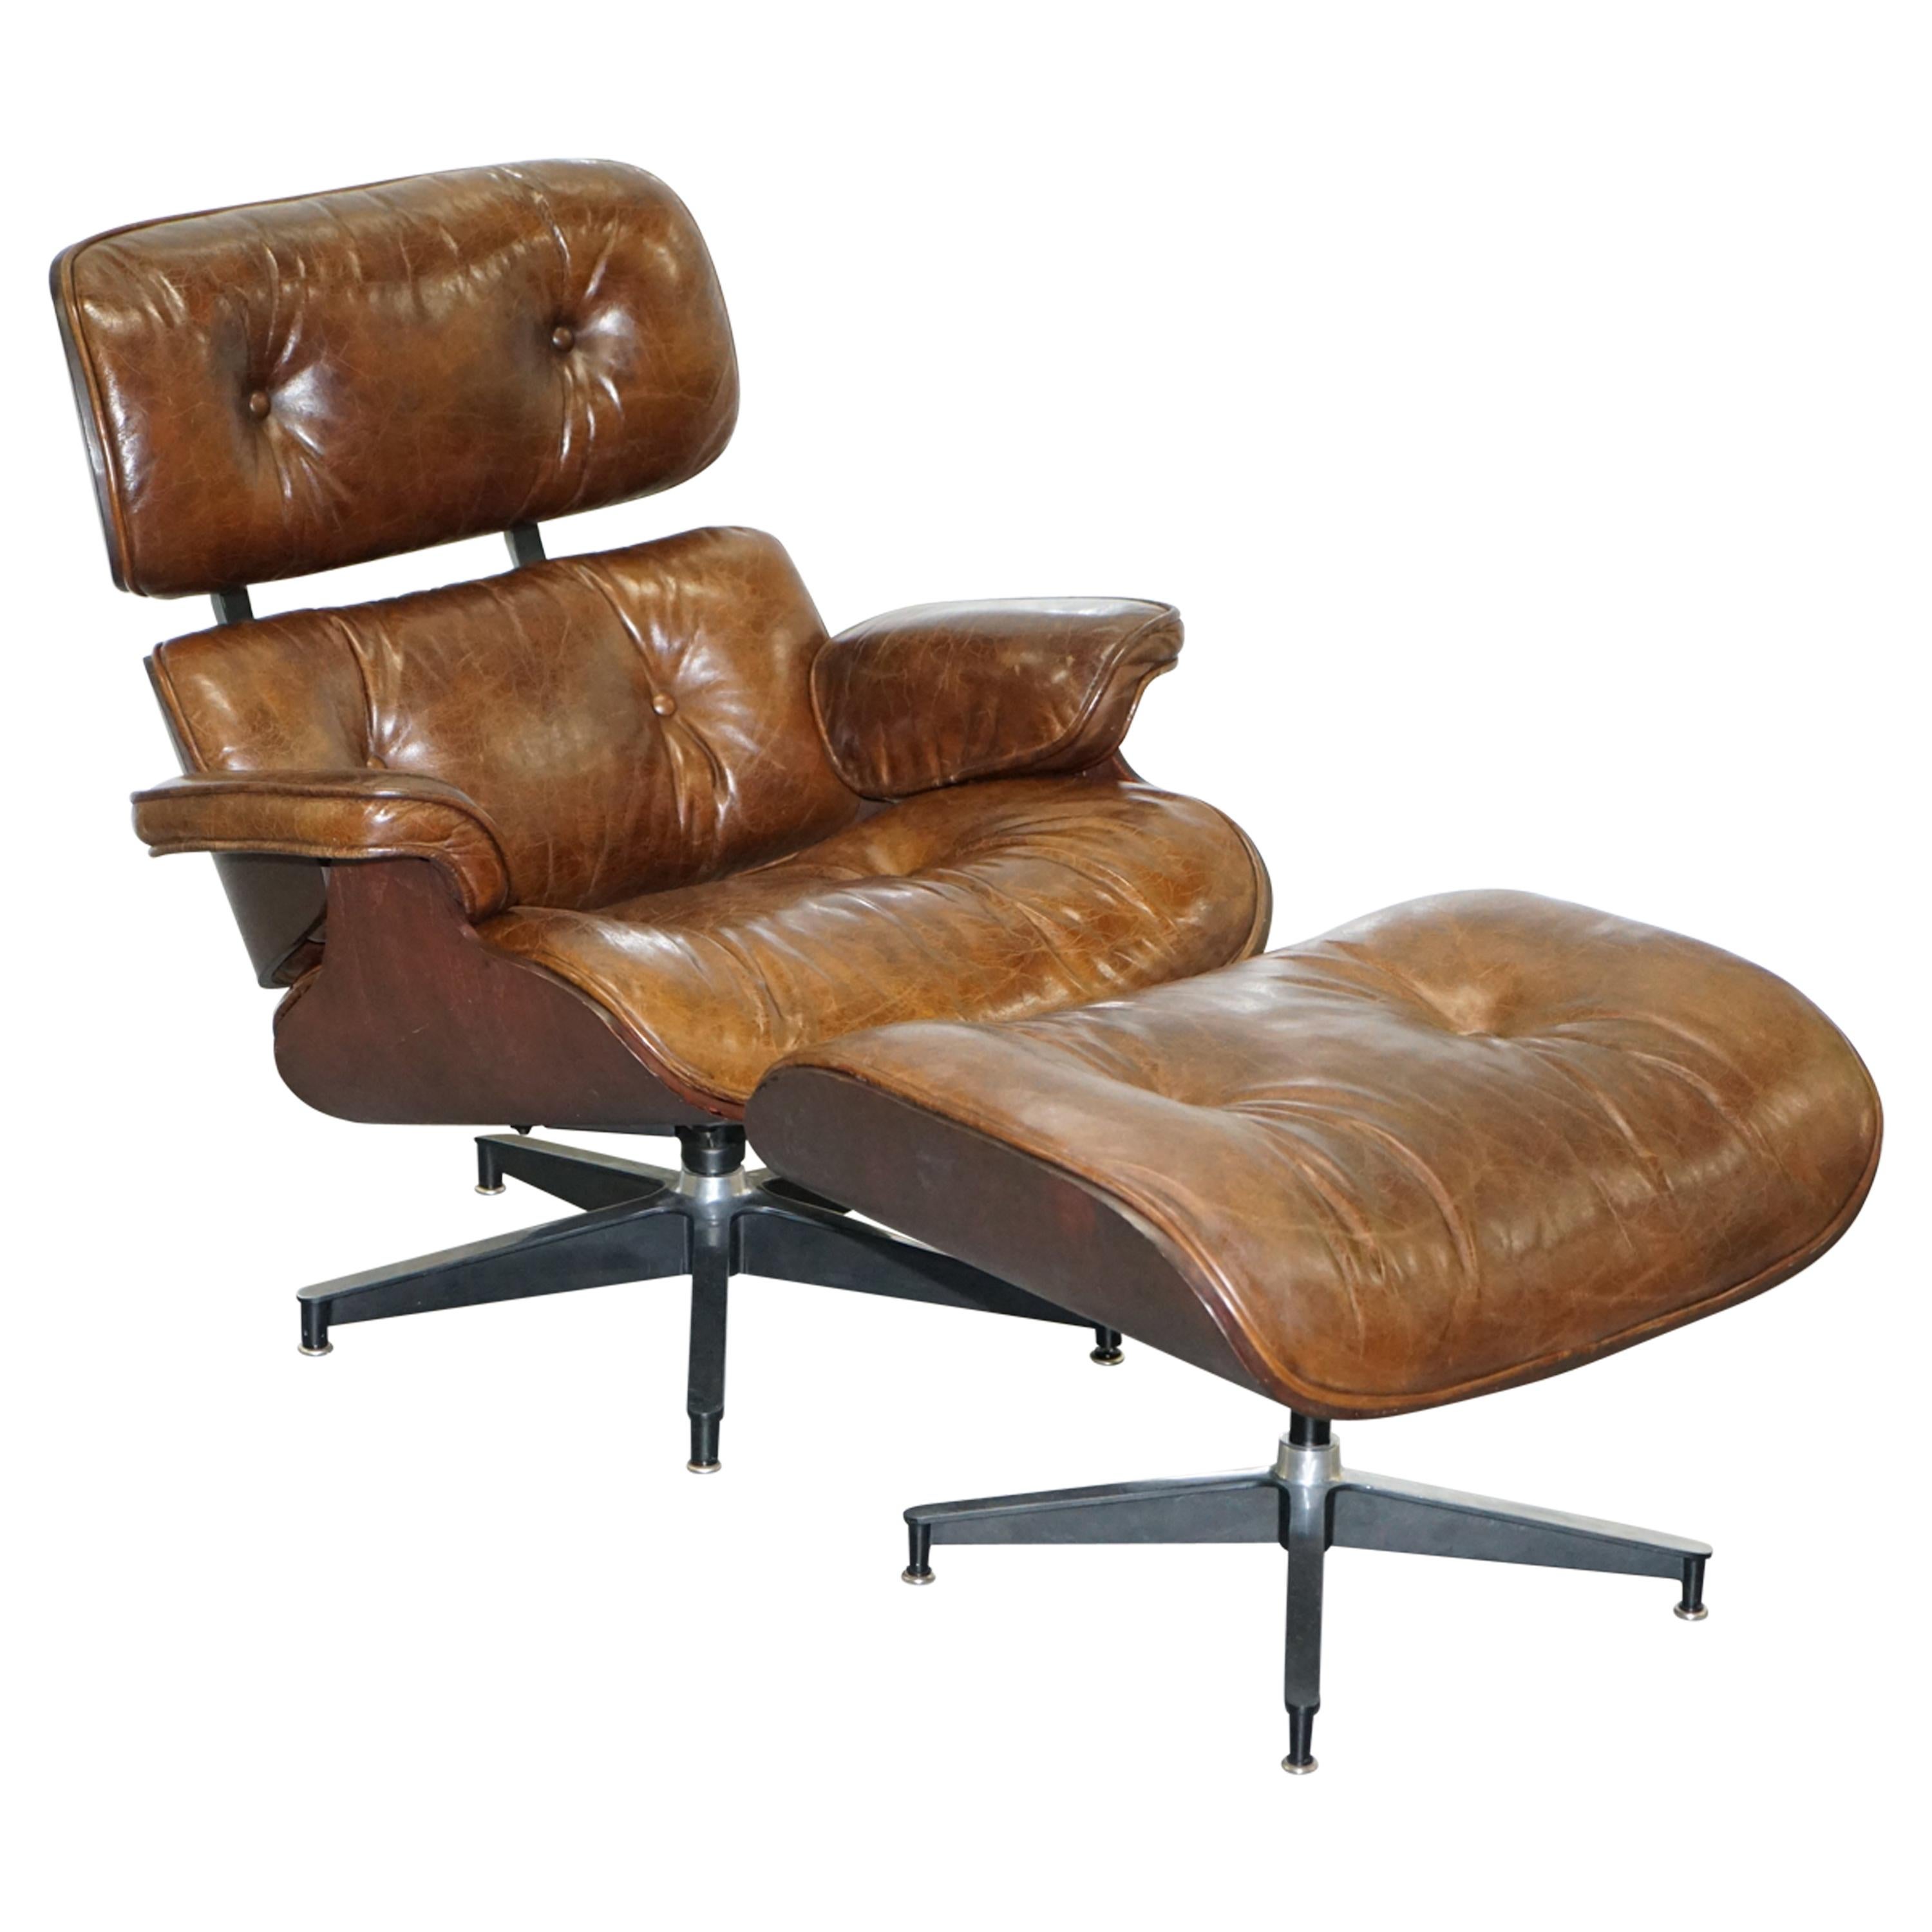 Stunning Vintage Heritage Brown Leather Lounge Armchair and Matching Ottoman